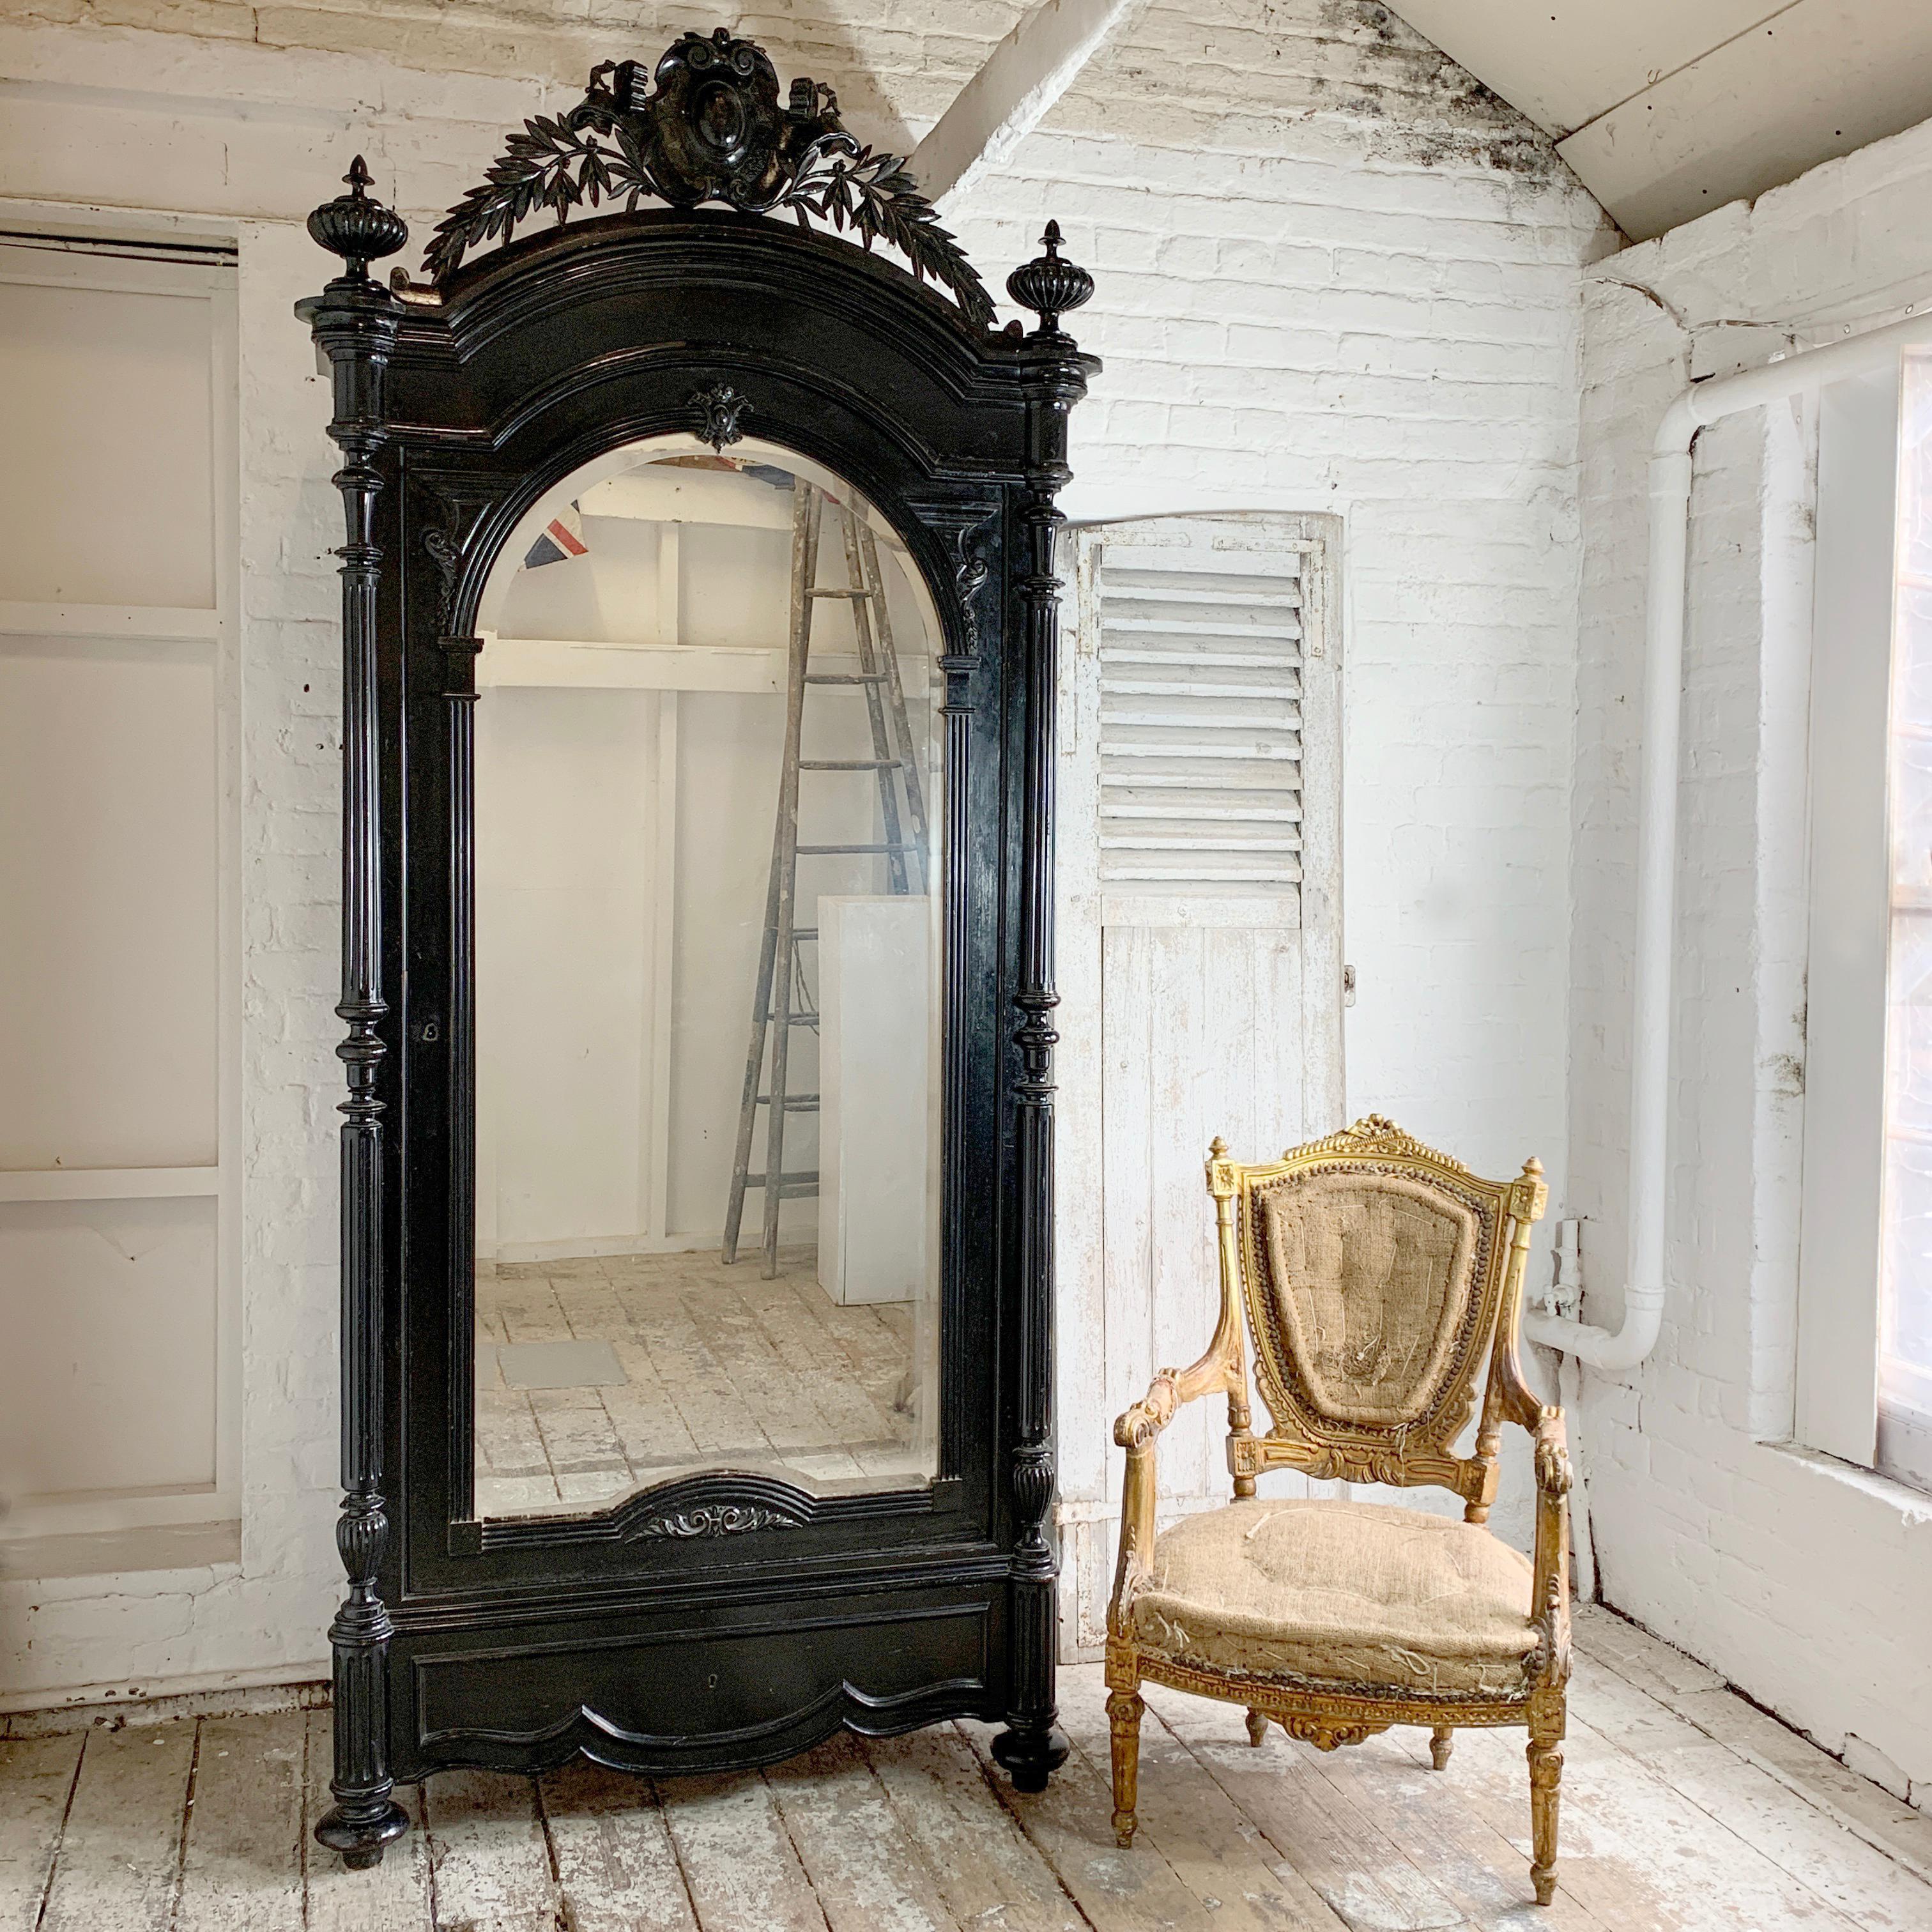 19th century French Gothic Armoire
This impressive large Armoire is decoratively hand carved in a Gothic style
Dating from the mid-19th century
French
Black in color, original ebonized finish with some overlayed wax/varnish finish in places
The